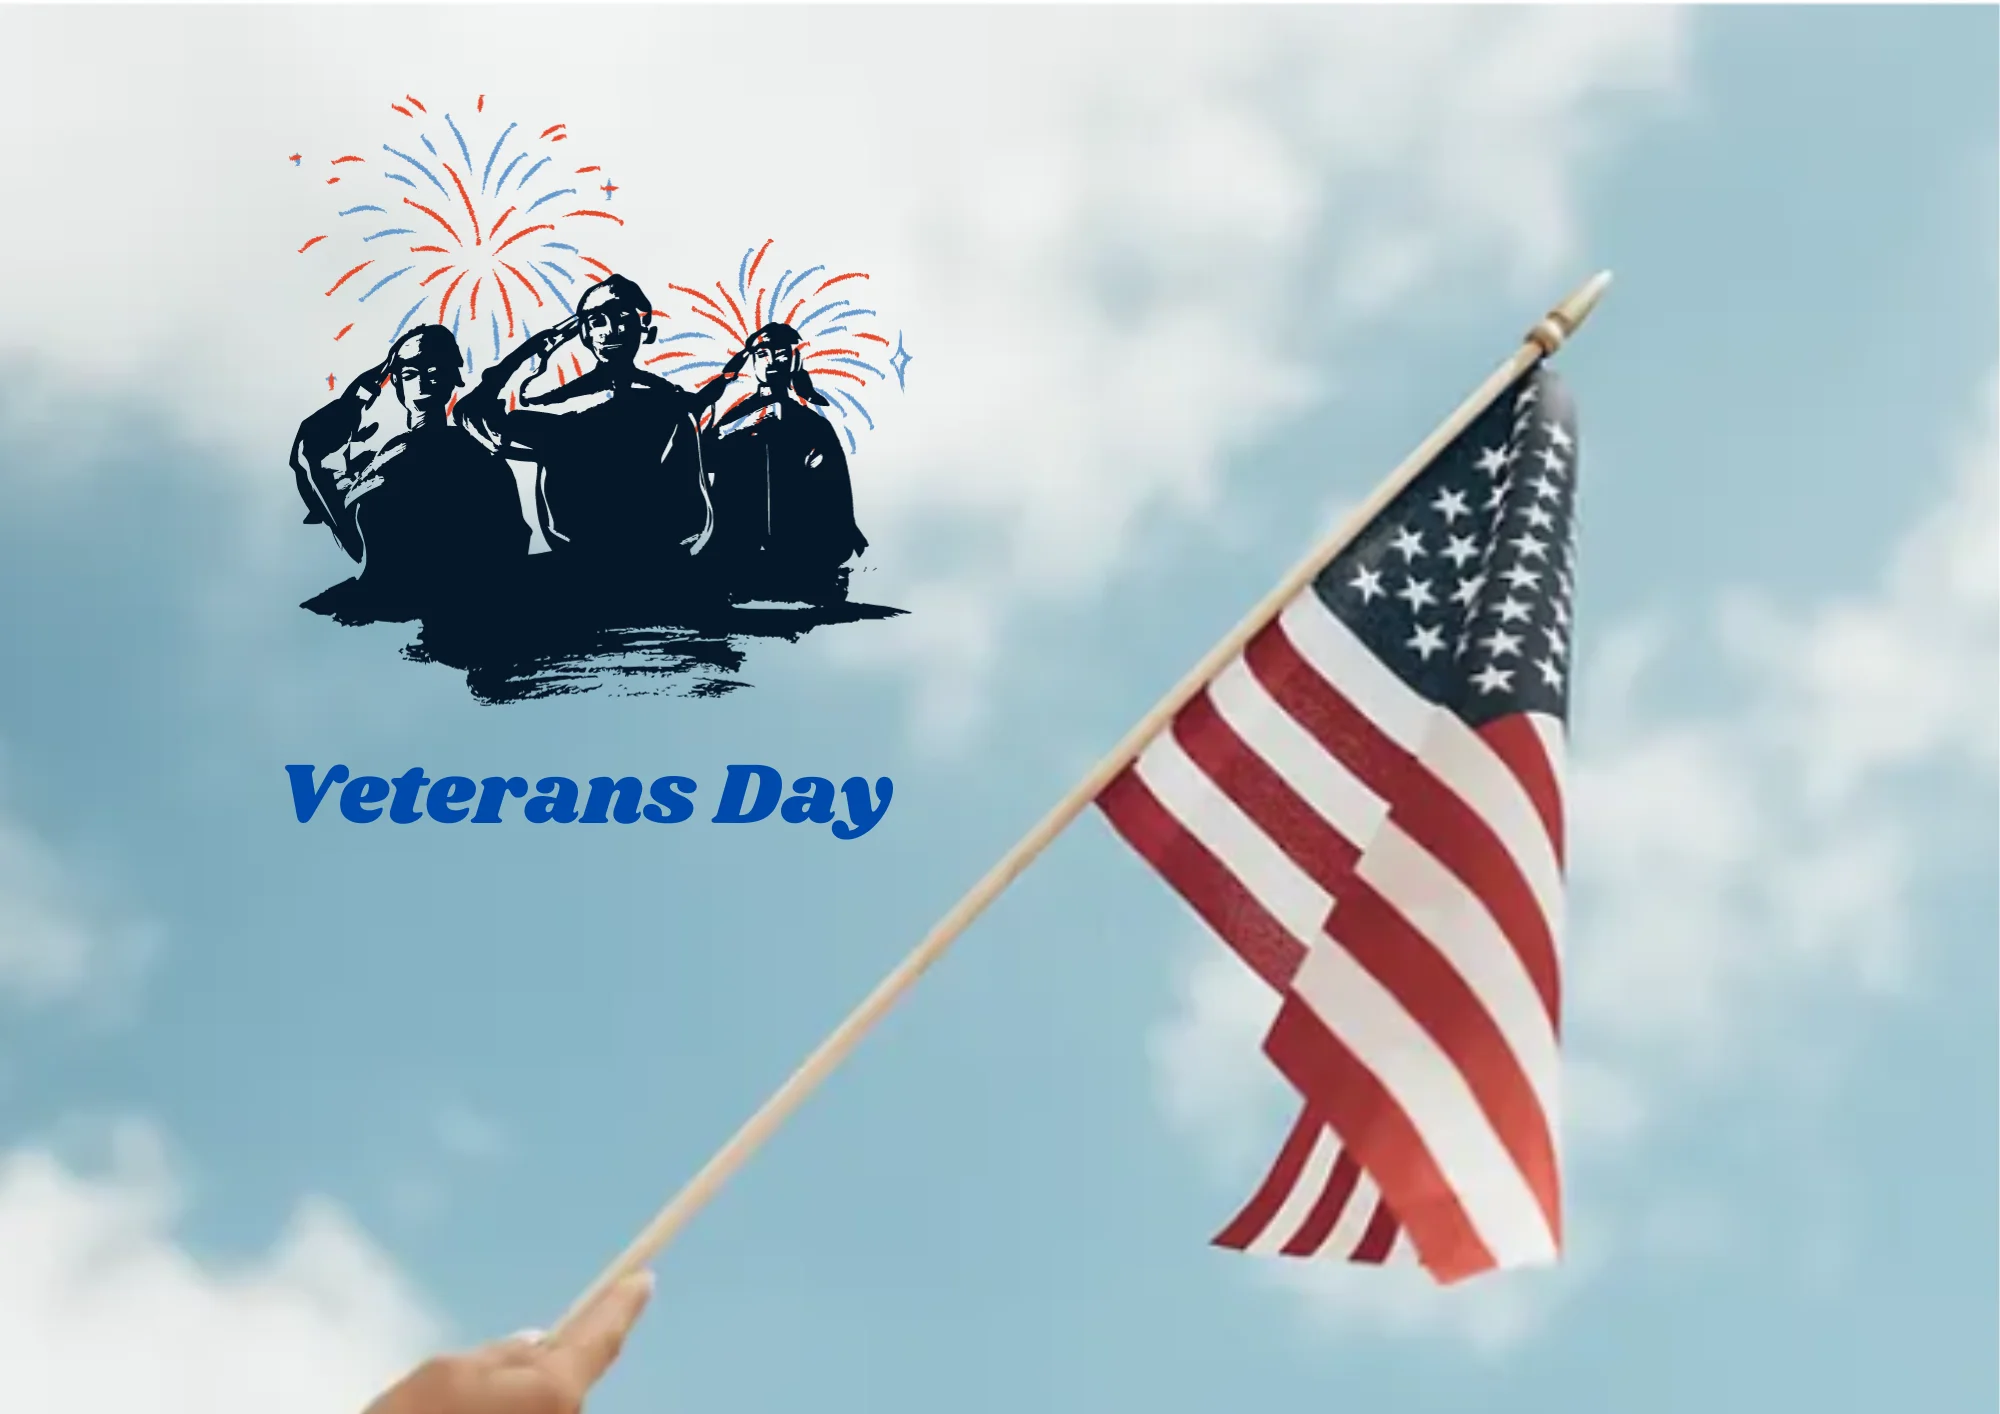 Veterans Day Activities For Middle School Students